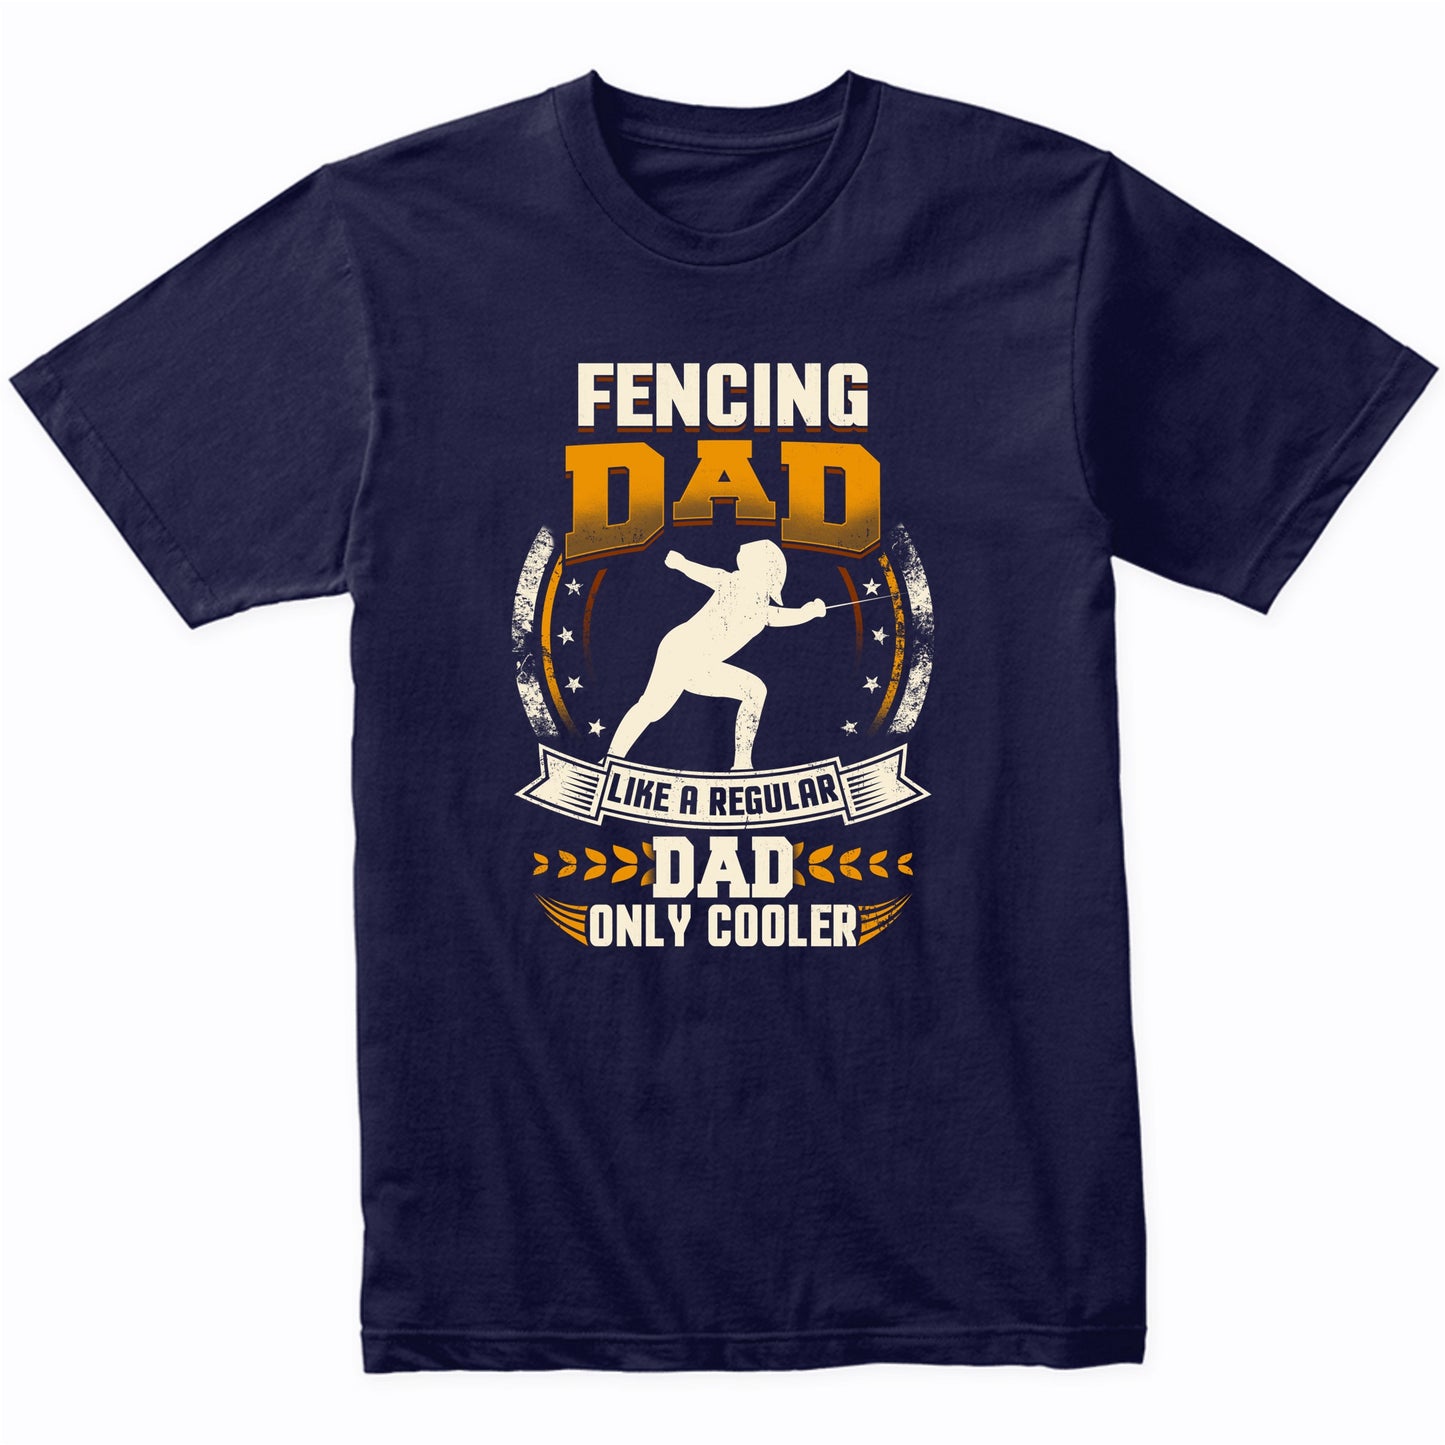 Fencing Dad Like A Regular Dad Only Cooler Funny T-Shirt